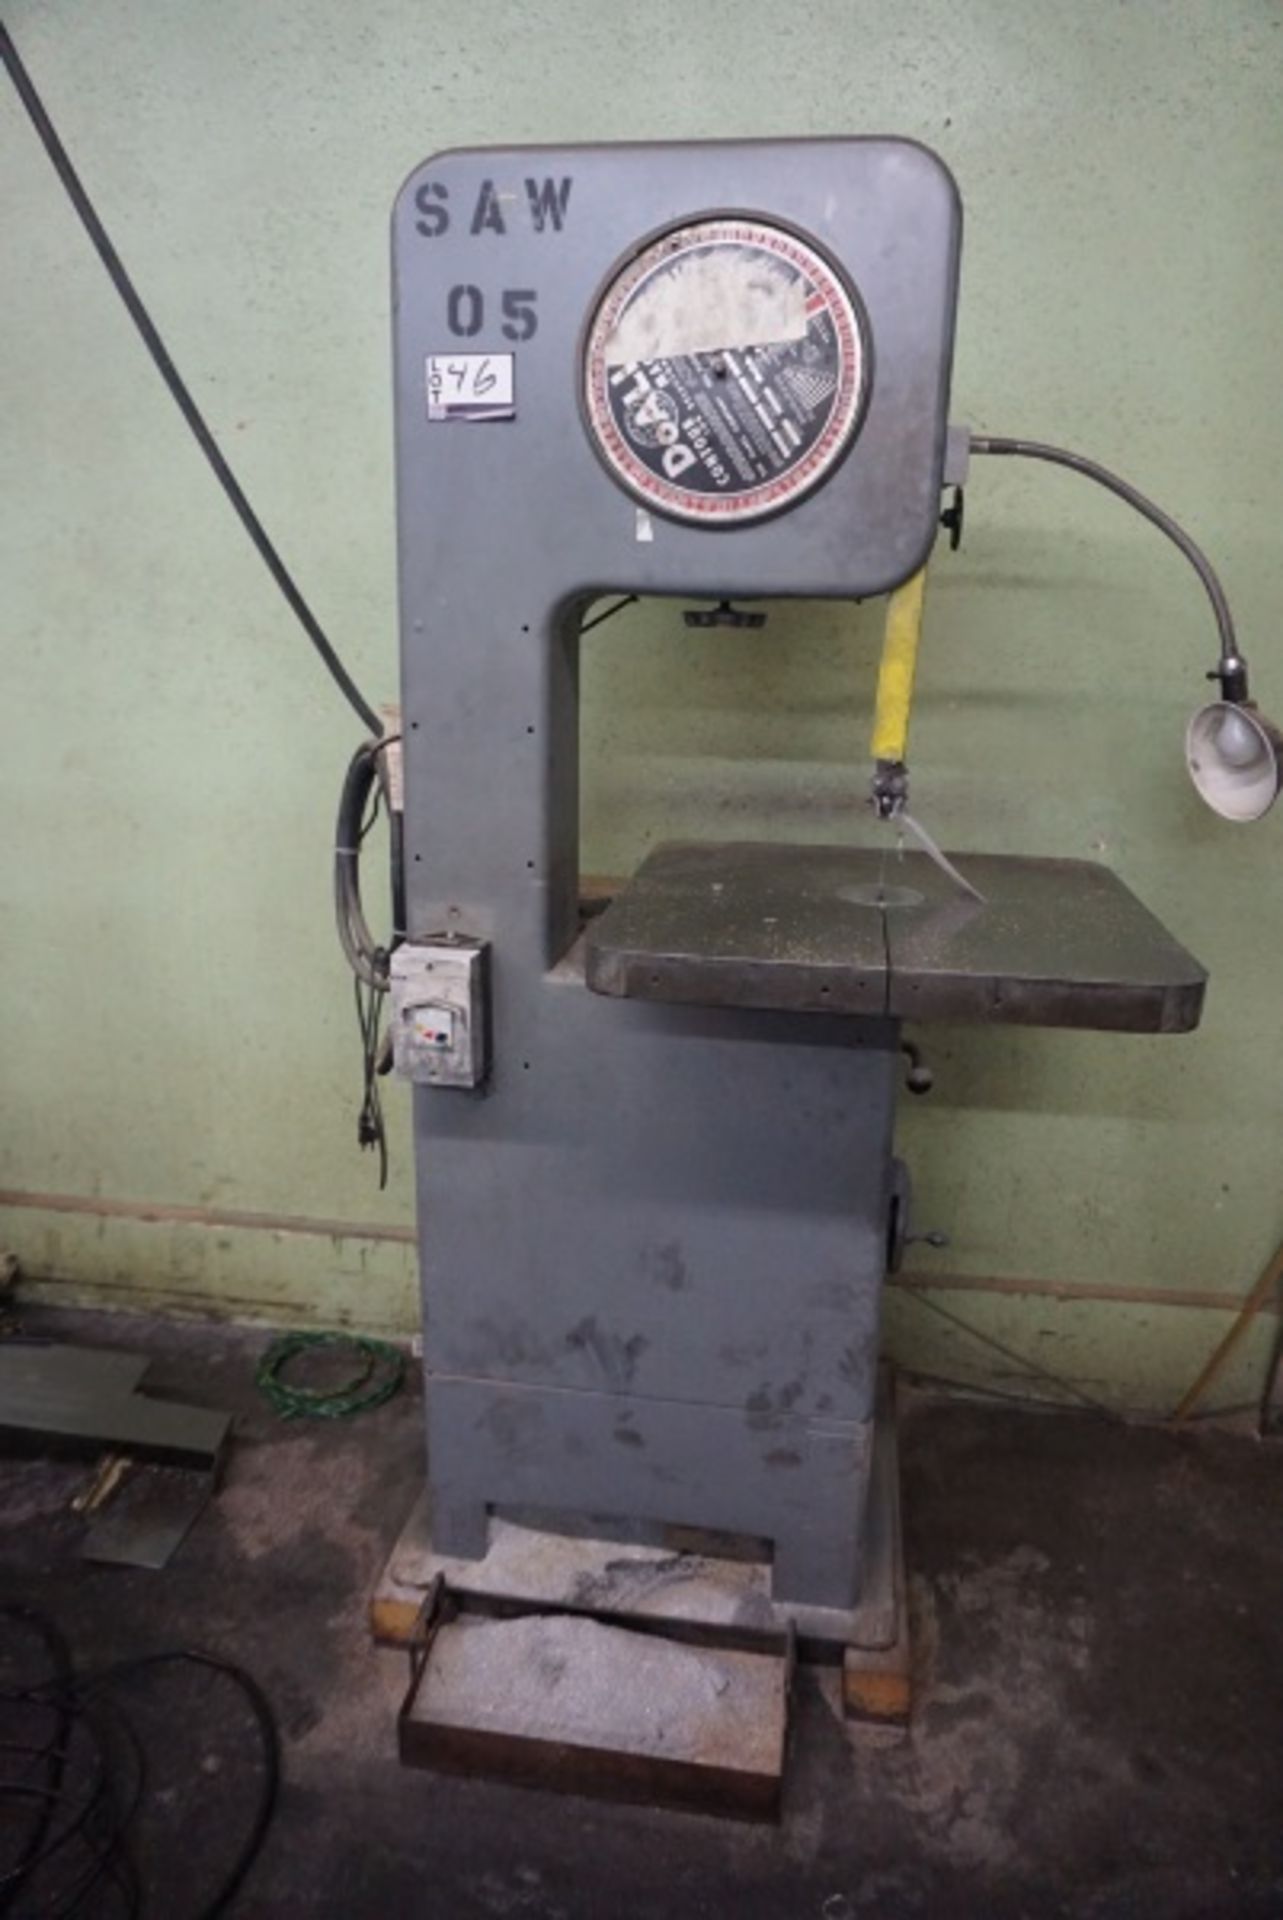 DoAll Vertical Band Saw